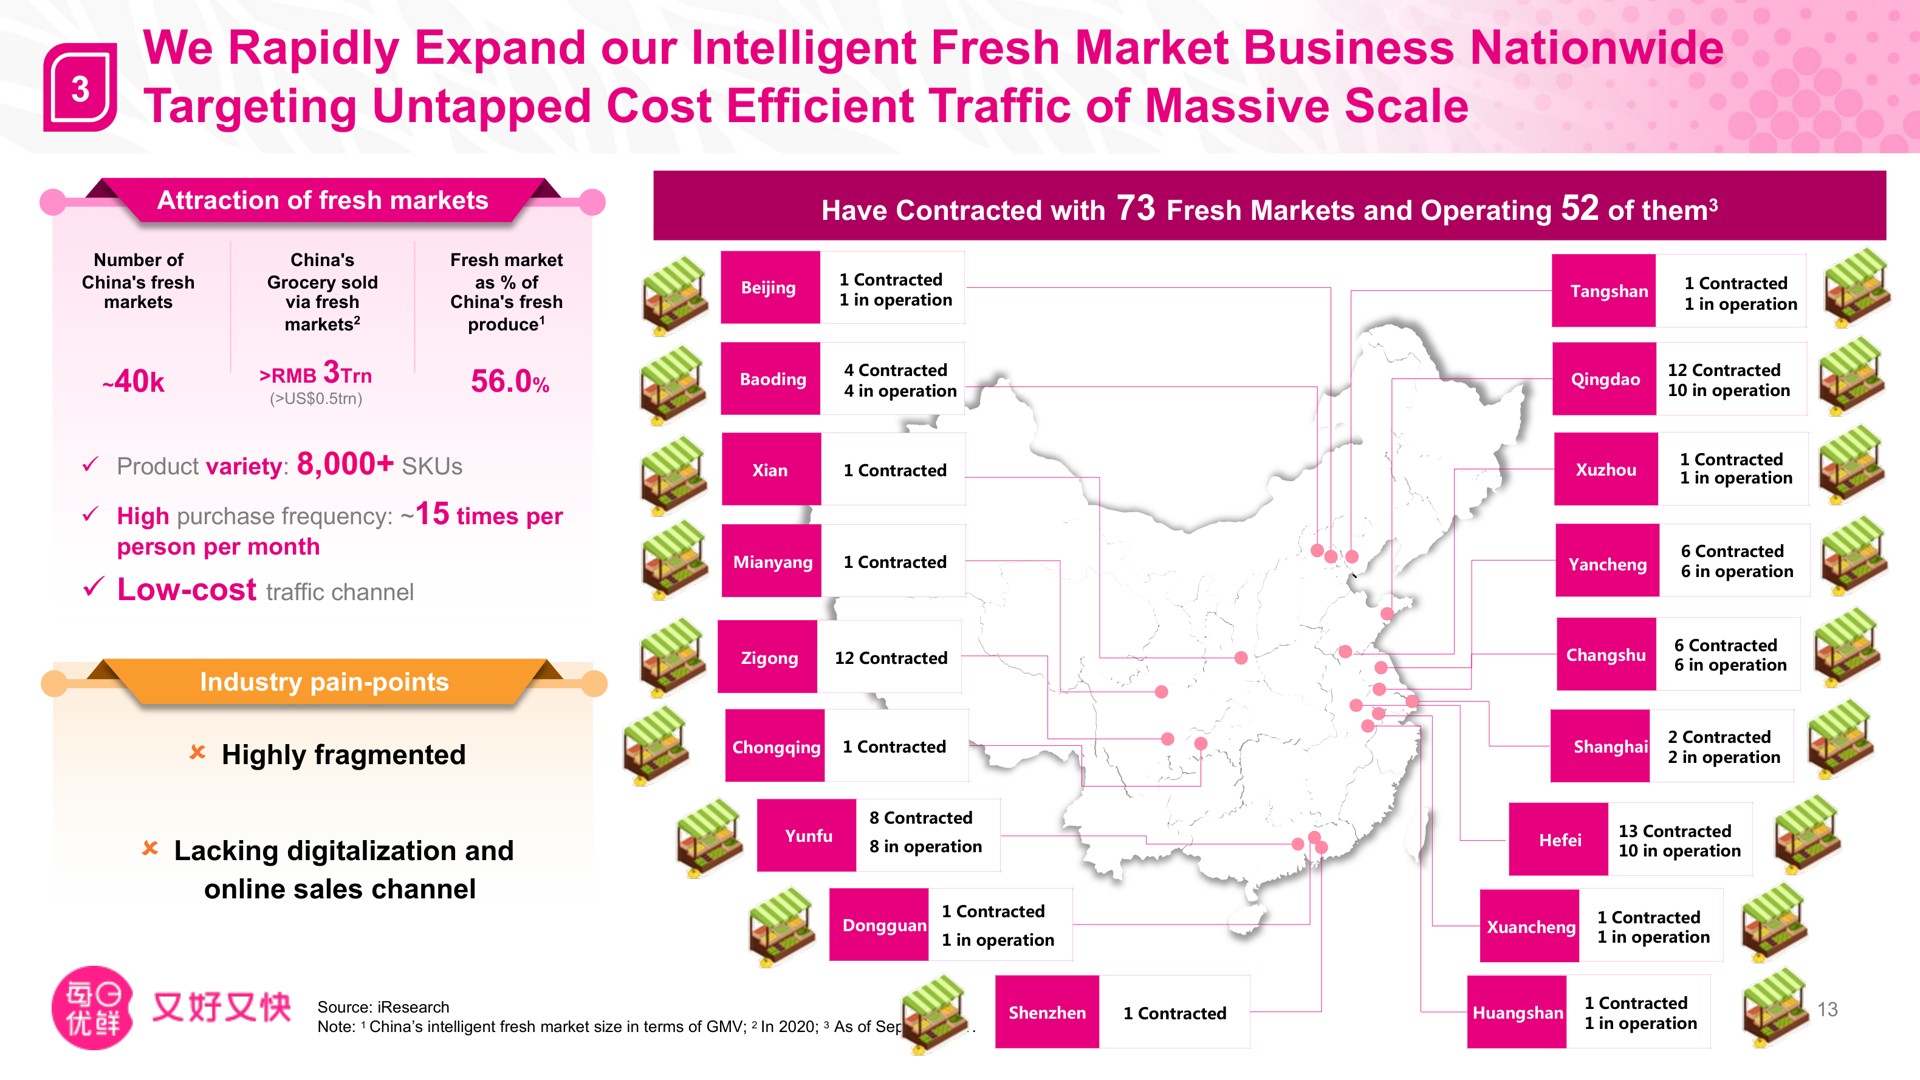 we rapidly expand our intelligent fresh market business nationwide targeting untapped cost efficient traffic of massive scale | Missfresh